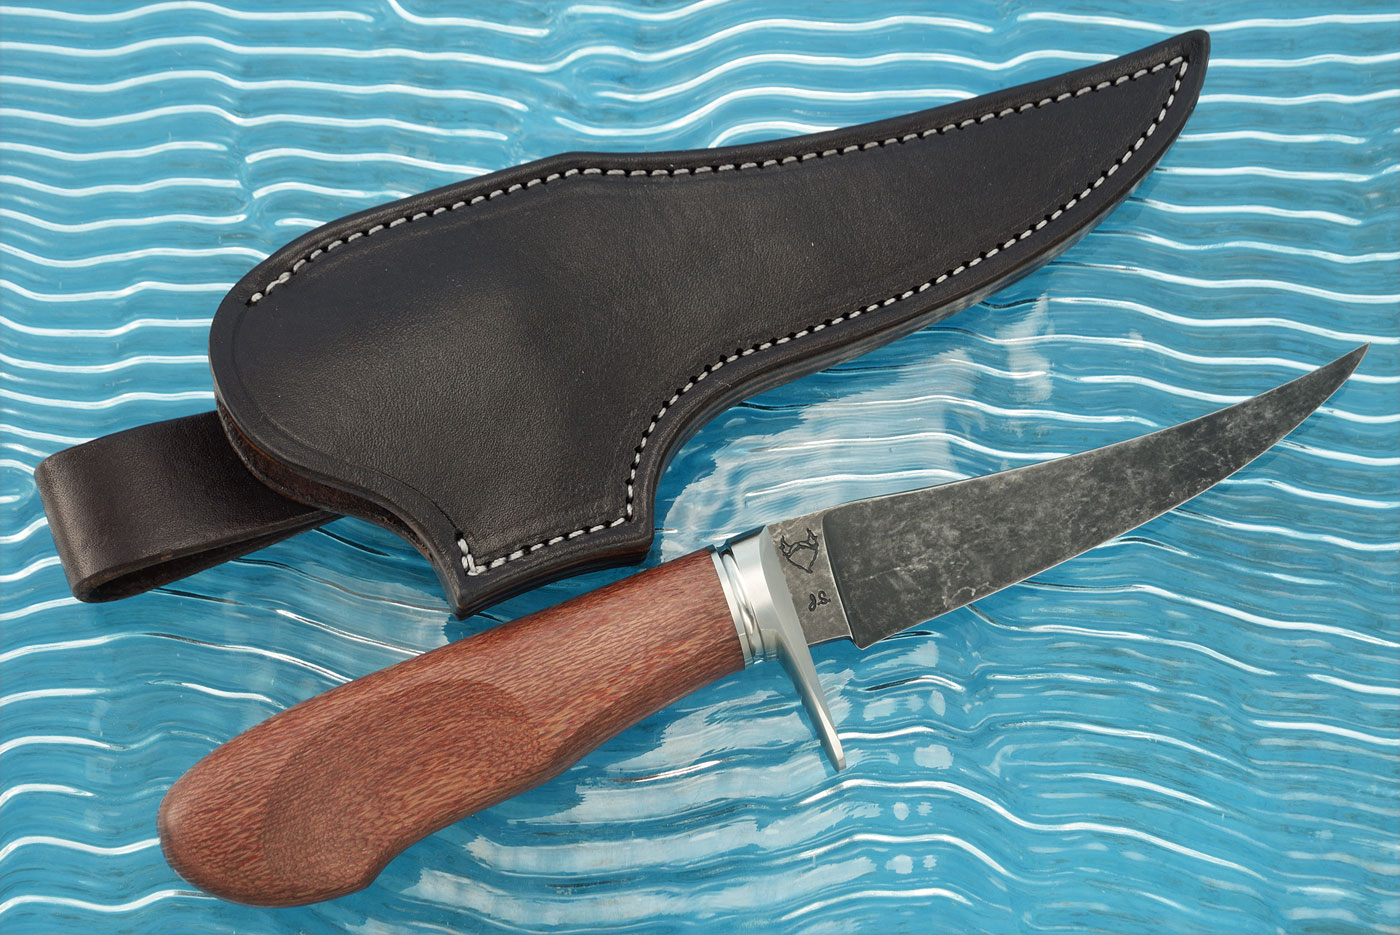 Fillet Knife with Macadamia Wood